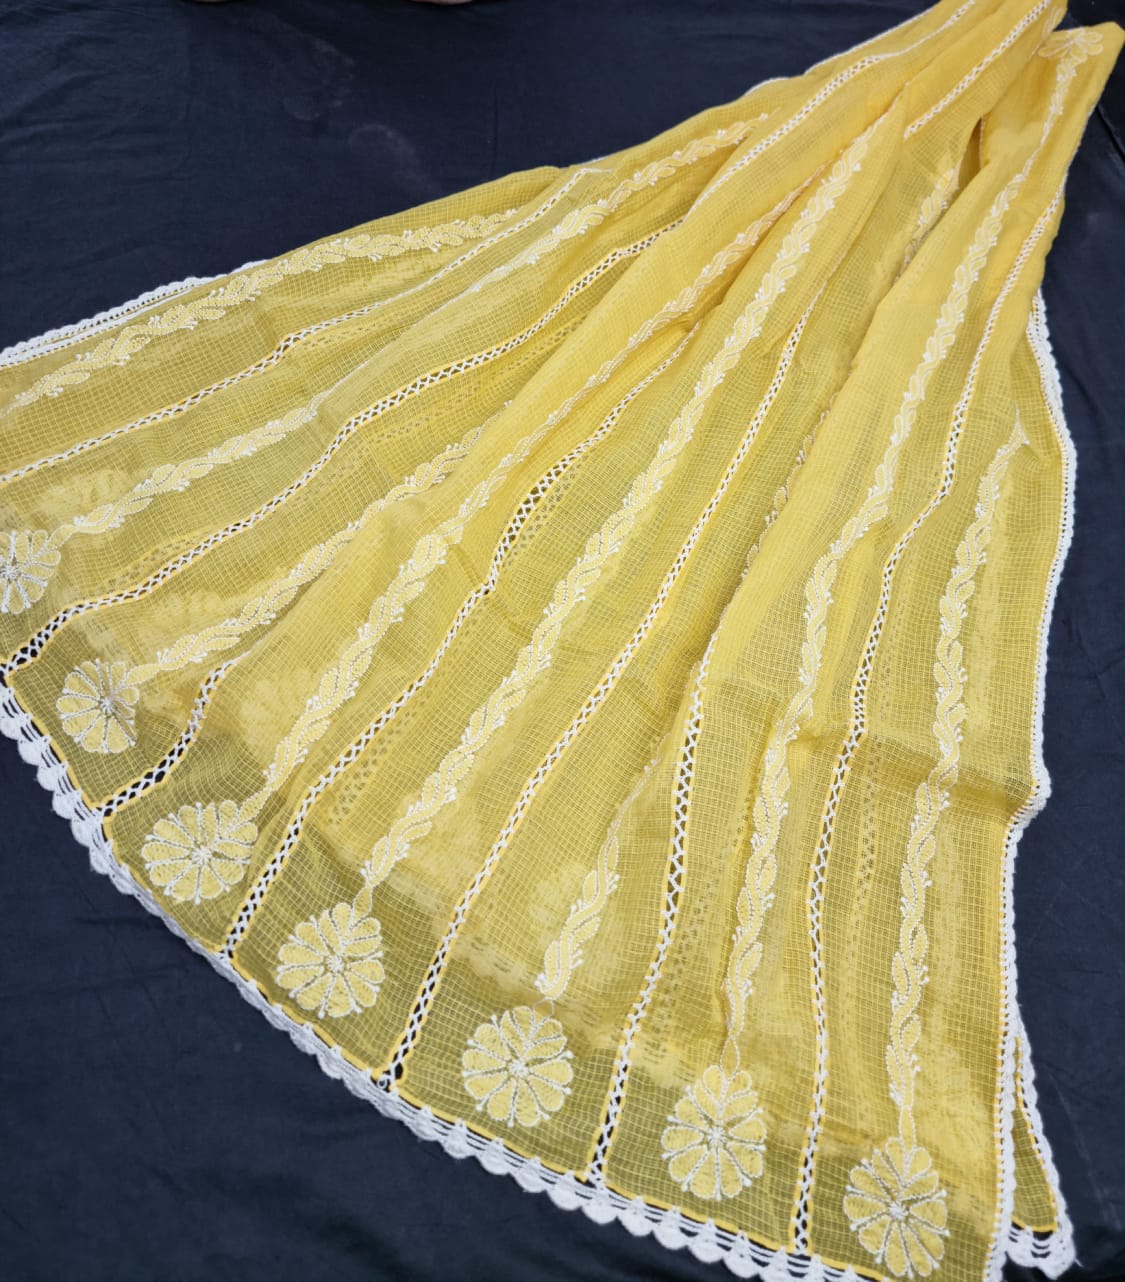 Handcrafted Kota Cotton Dupatta with heavy Chikankari embroidery & crochet borders - Dyeable